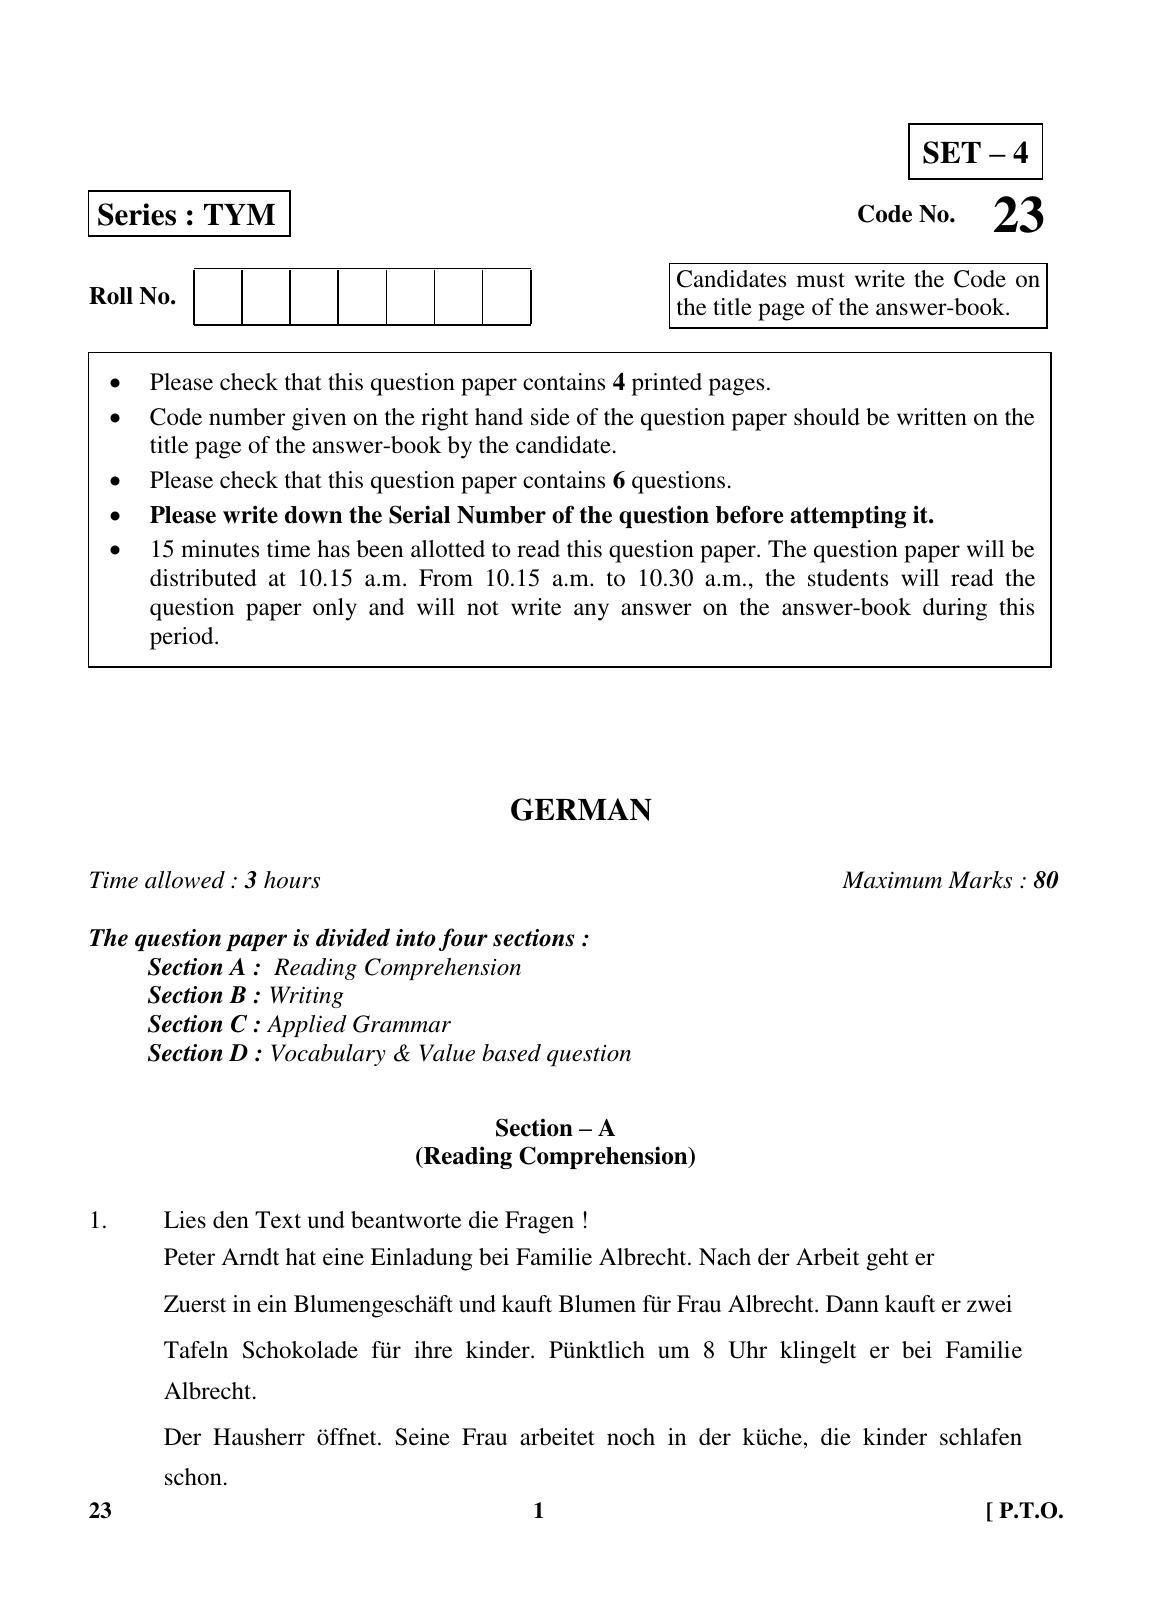 CBSE Class 10 23 (German) 2018 Question Paper - Page 1